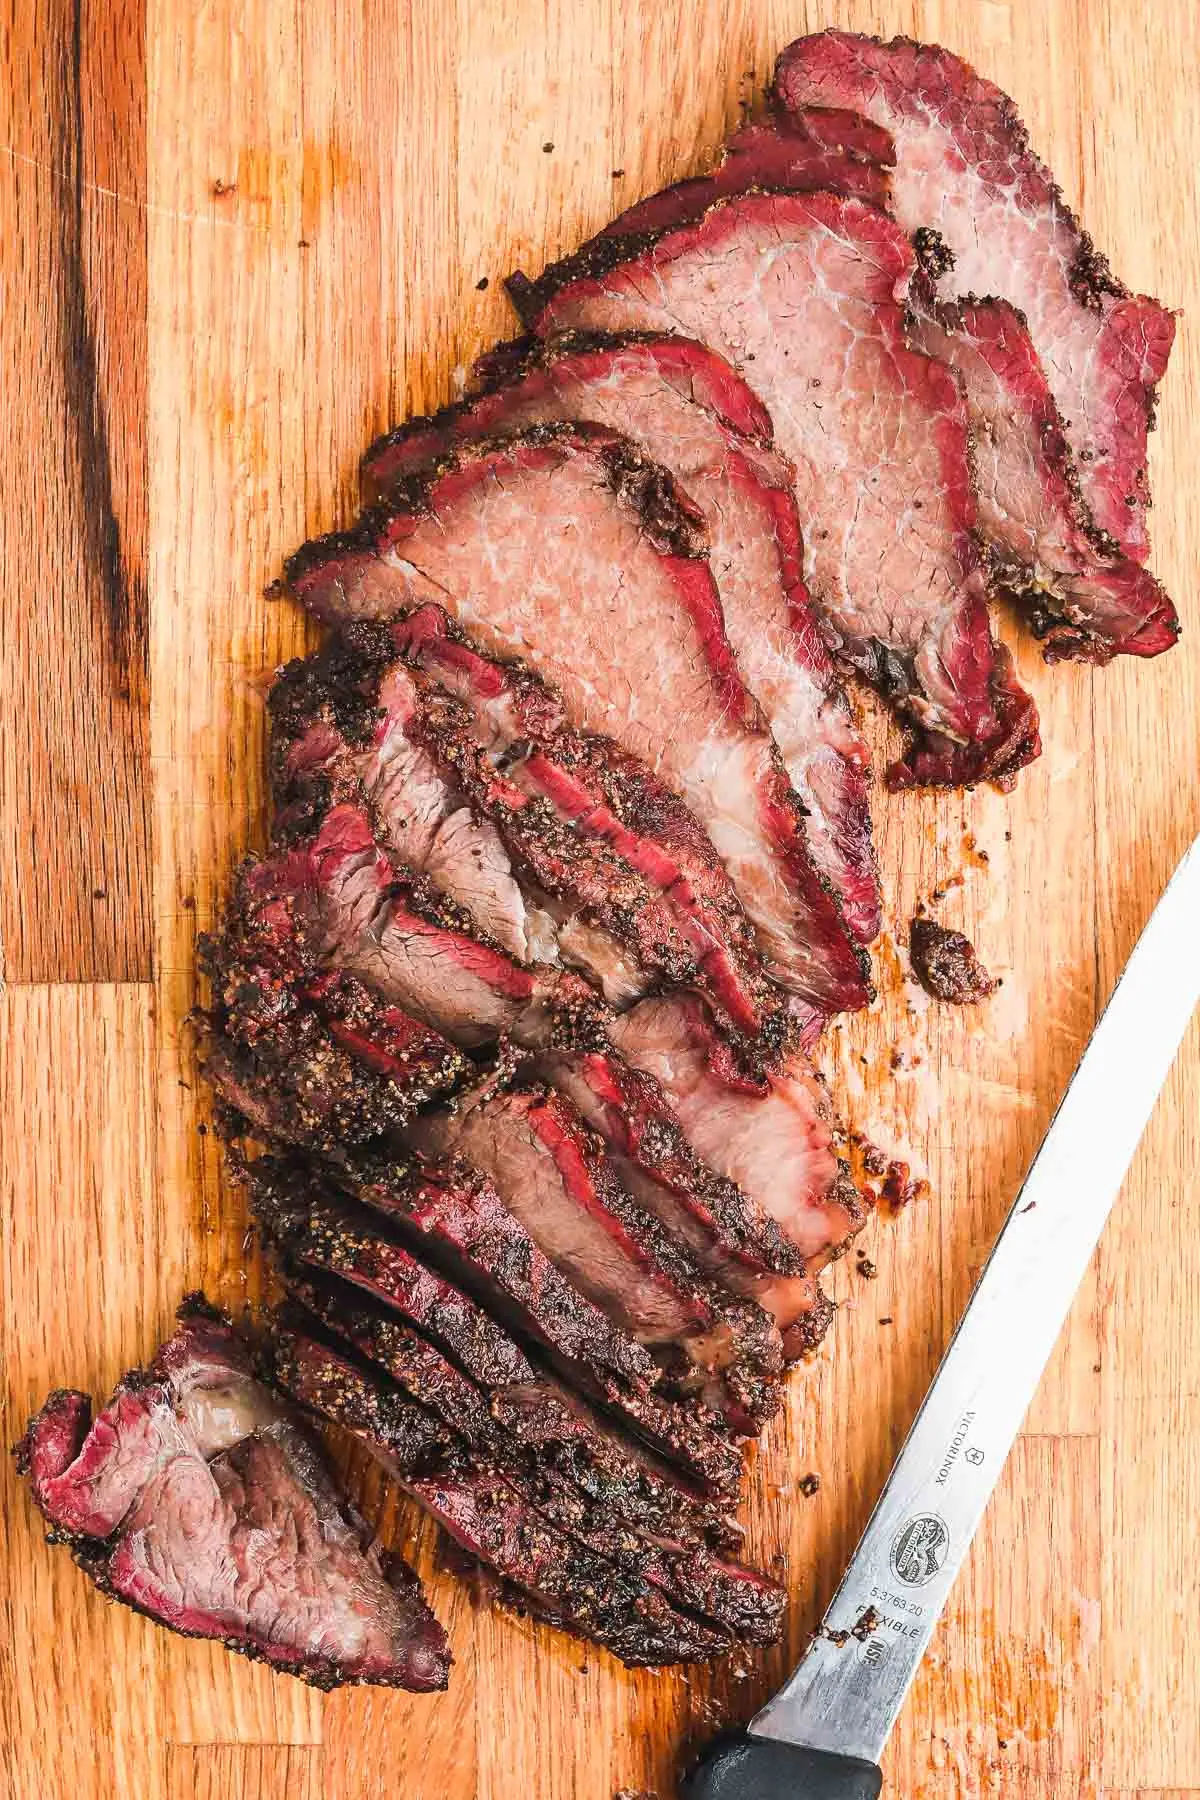 smoked beef roast marinade - What to marinate a roast in before smoking